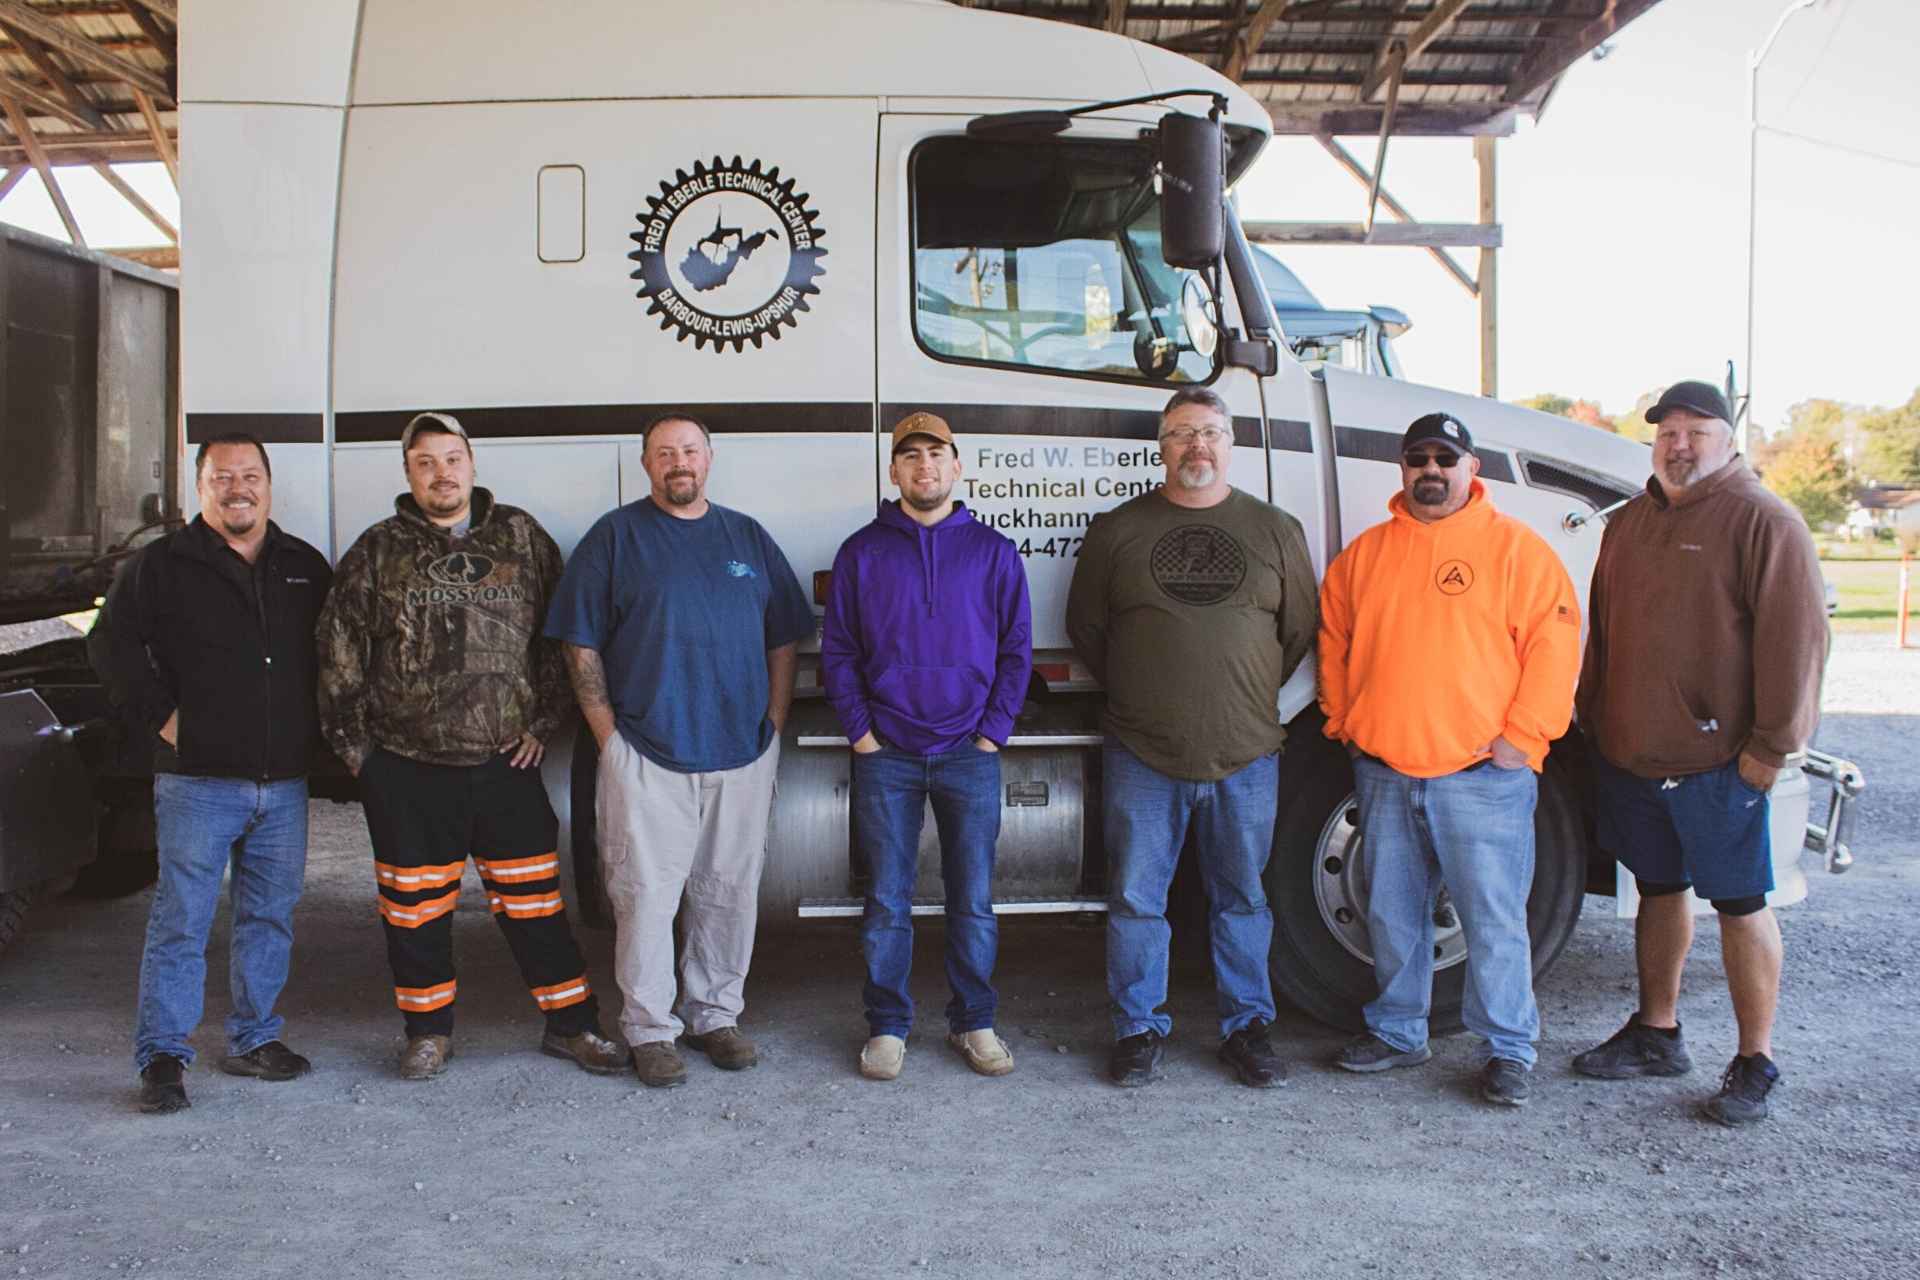 From left to right: Ron Roach (instructor), Tyler Barlow, Jeremy McCauley, Sheldon Long, Matthew Haller, David Wolfe and Barry Kiernan (instructor). Not pictured: student Jeff McMullen.